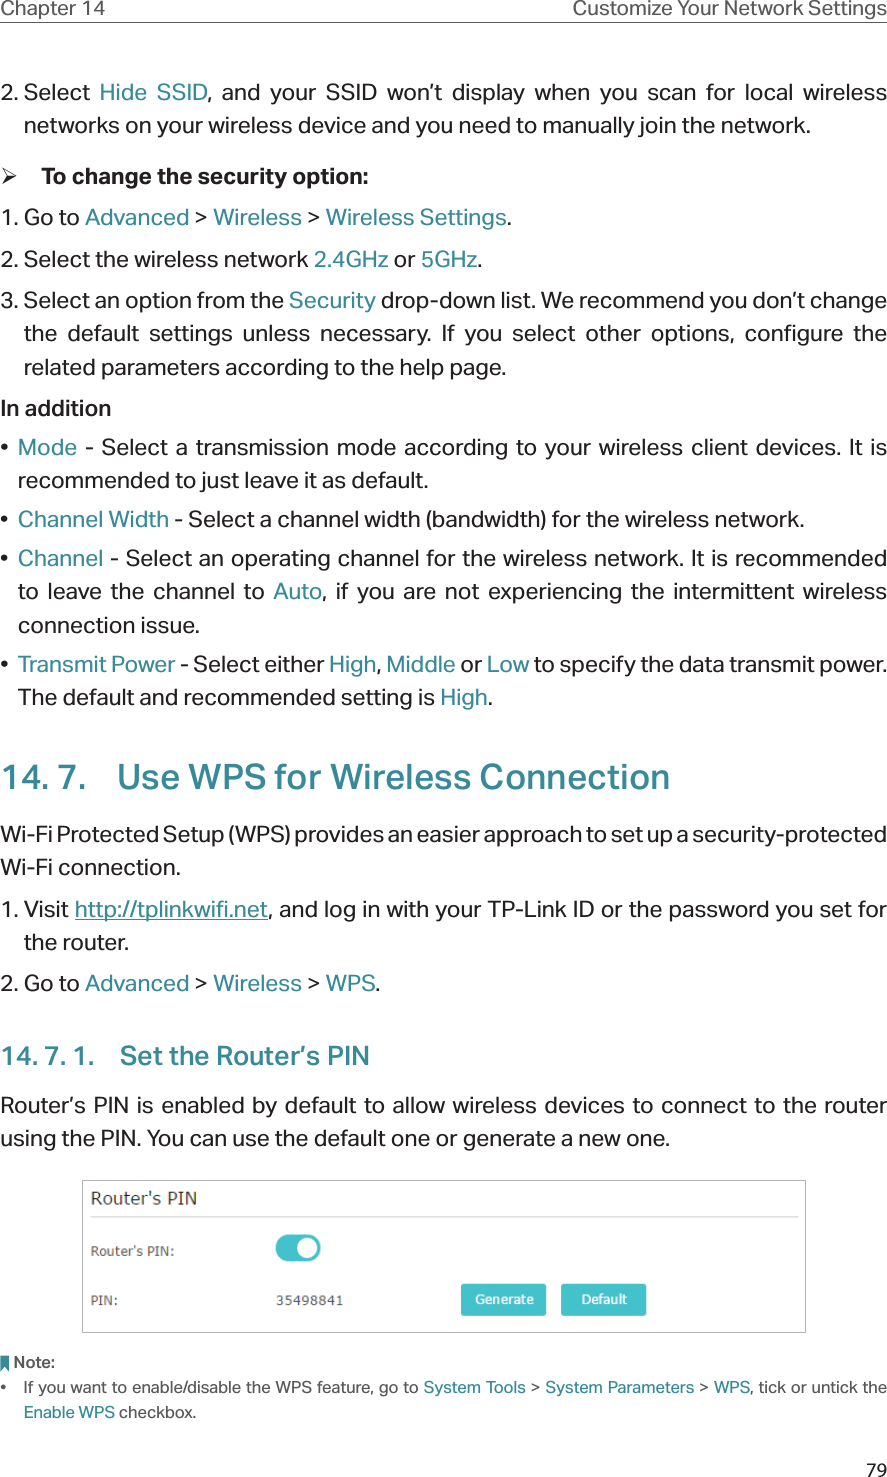 79Chapter 14 Customize Your Network Settings2. Select  Hide SSID, and your SSID won’t display when you scan for local wireless networks on your wireless device and you need to manually join the network. ¾To change the security option:1. Go to Advanced &gt; Wireless &gt; Wireless Settings. 2. Select the wireless network 2.4GHz or 5GHz.3. Select an option from the Security drop-down list. We recommend you don’t change the default settings unless necessary. If you select other options, configure the related parameters according to the help page.In addition•  Mode - Select a transmission mode according to your wireless client devices. It is recommended to just leave it as default.•  Channel Width - Select a channel width (bandwidth) for the wireless network.•  Channel - Select an operating channel for the wireless network. It is recommended to leave the channel to Auto, if you are not experiencing the intermittent wireless connection issue.•  Transmit Power - Select either High, Middle or Low to specify the data transmit power. The default and recommended setting is High.14. 7.  Use WPS for Wireless ConnectionWi-Fi Protected Setup (WPS) provides an easier approach to set up a security-protected Wi-Fi connection.1. Visit http://tplinkwifi.net, and log in with your TP-Link ID or the password you set for the router.2. Go to Advanced &gt; Wireless &gt; WPS.14. 7. 1.  Set the Router’s PINRouter’s PIN is enabled by default to allow wireless devices to connect to the router using the PIN. You can use the default one or generate a new one.Note:•  If you want to enable/disable the WPS feature, go to System Tools &gt; System Parameters &gt; WPS, tick or untick the Enable WPS checkbox.